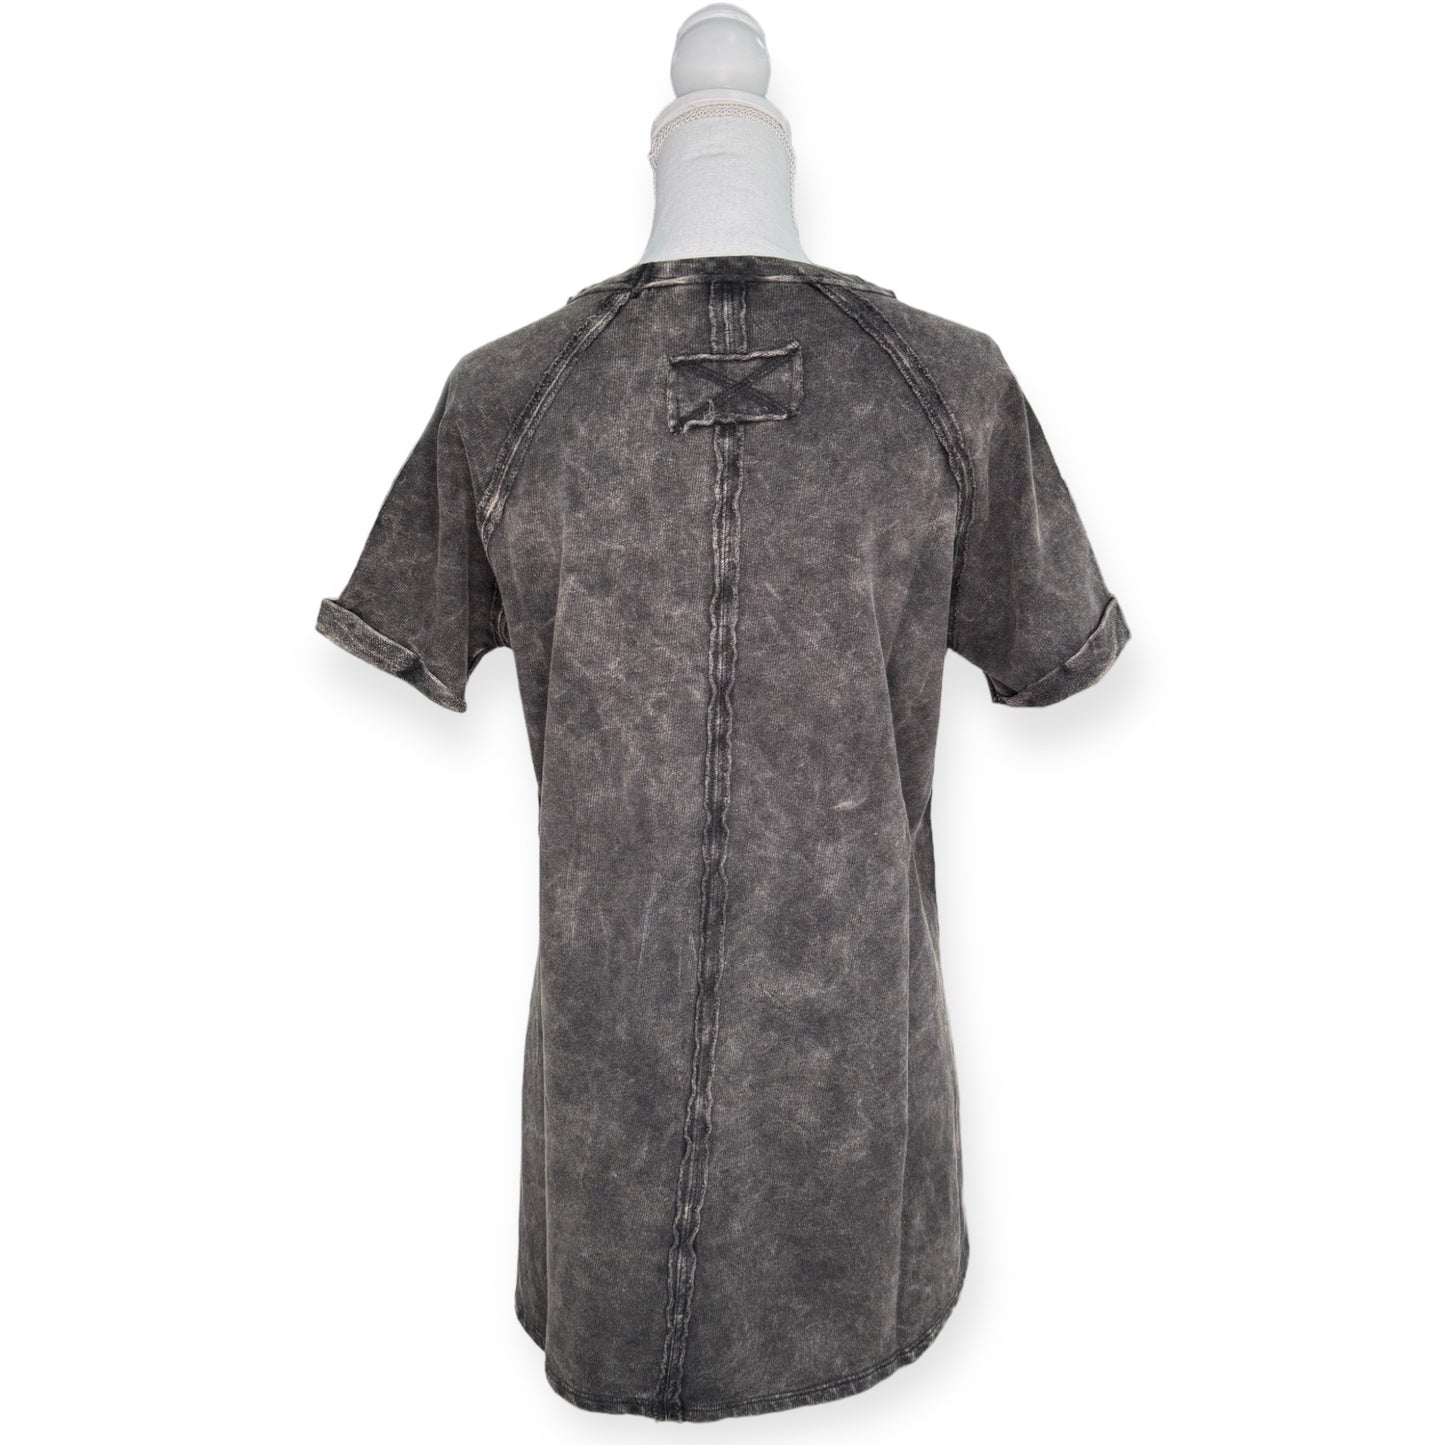 Zenana Washed Tee with Accented Hems - Charcoal